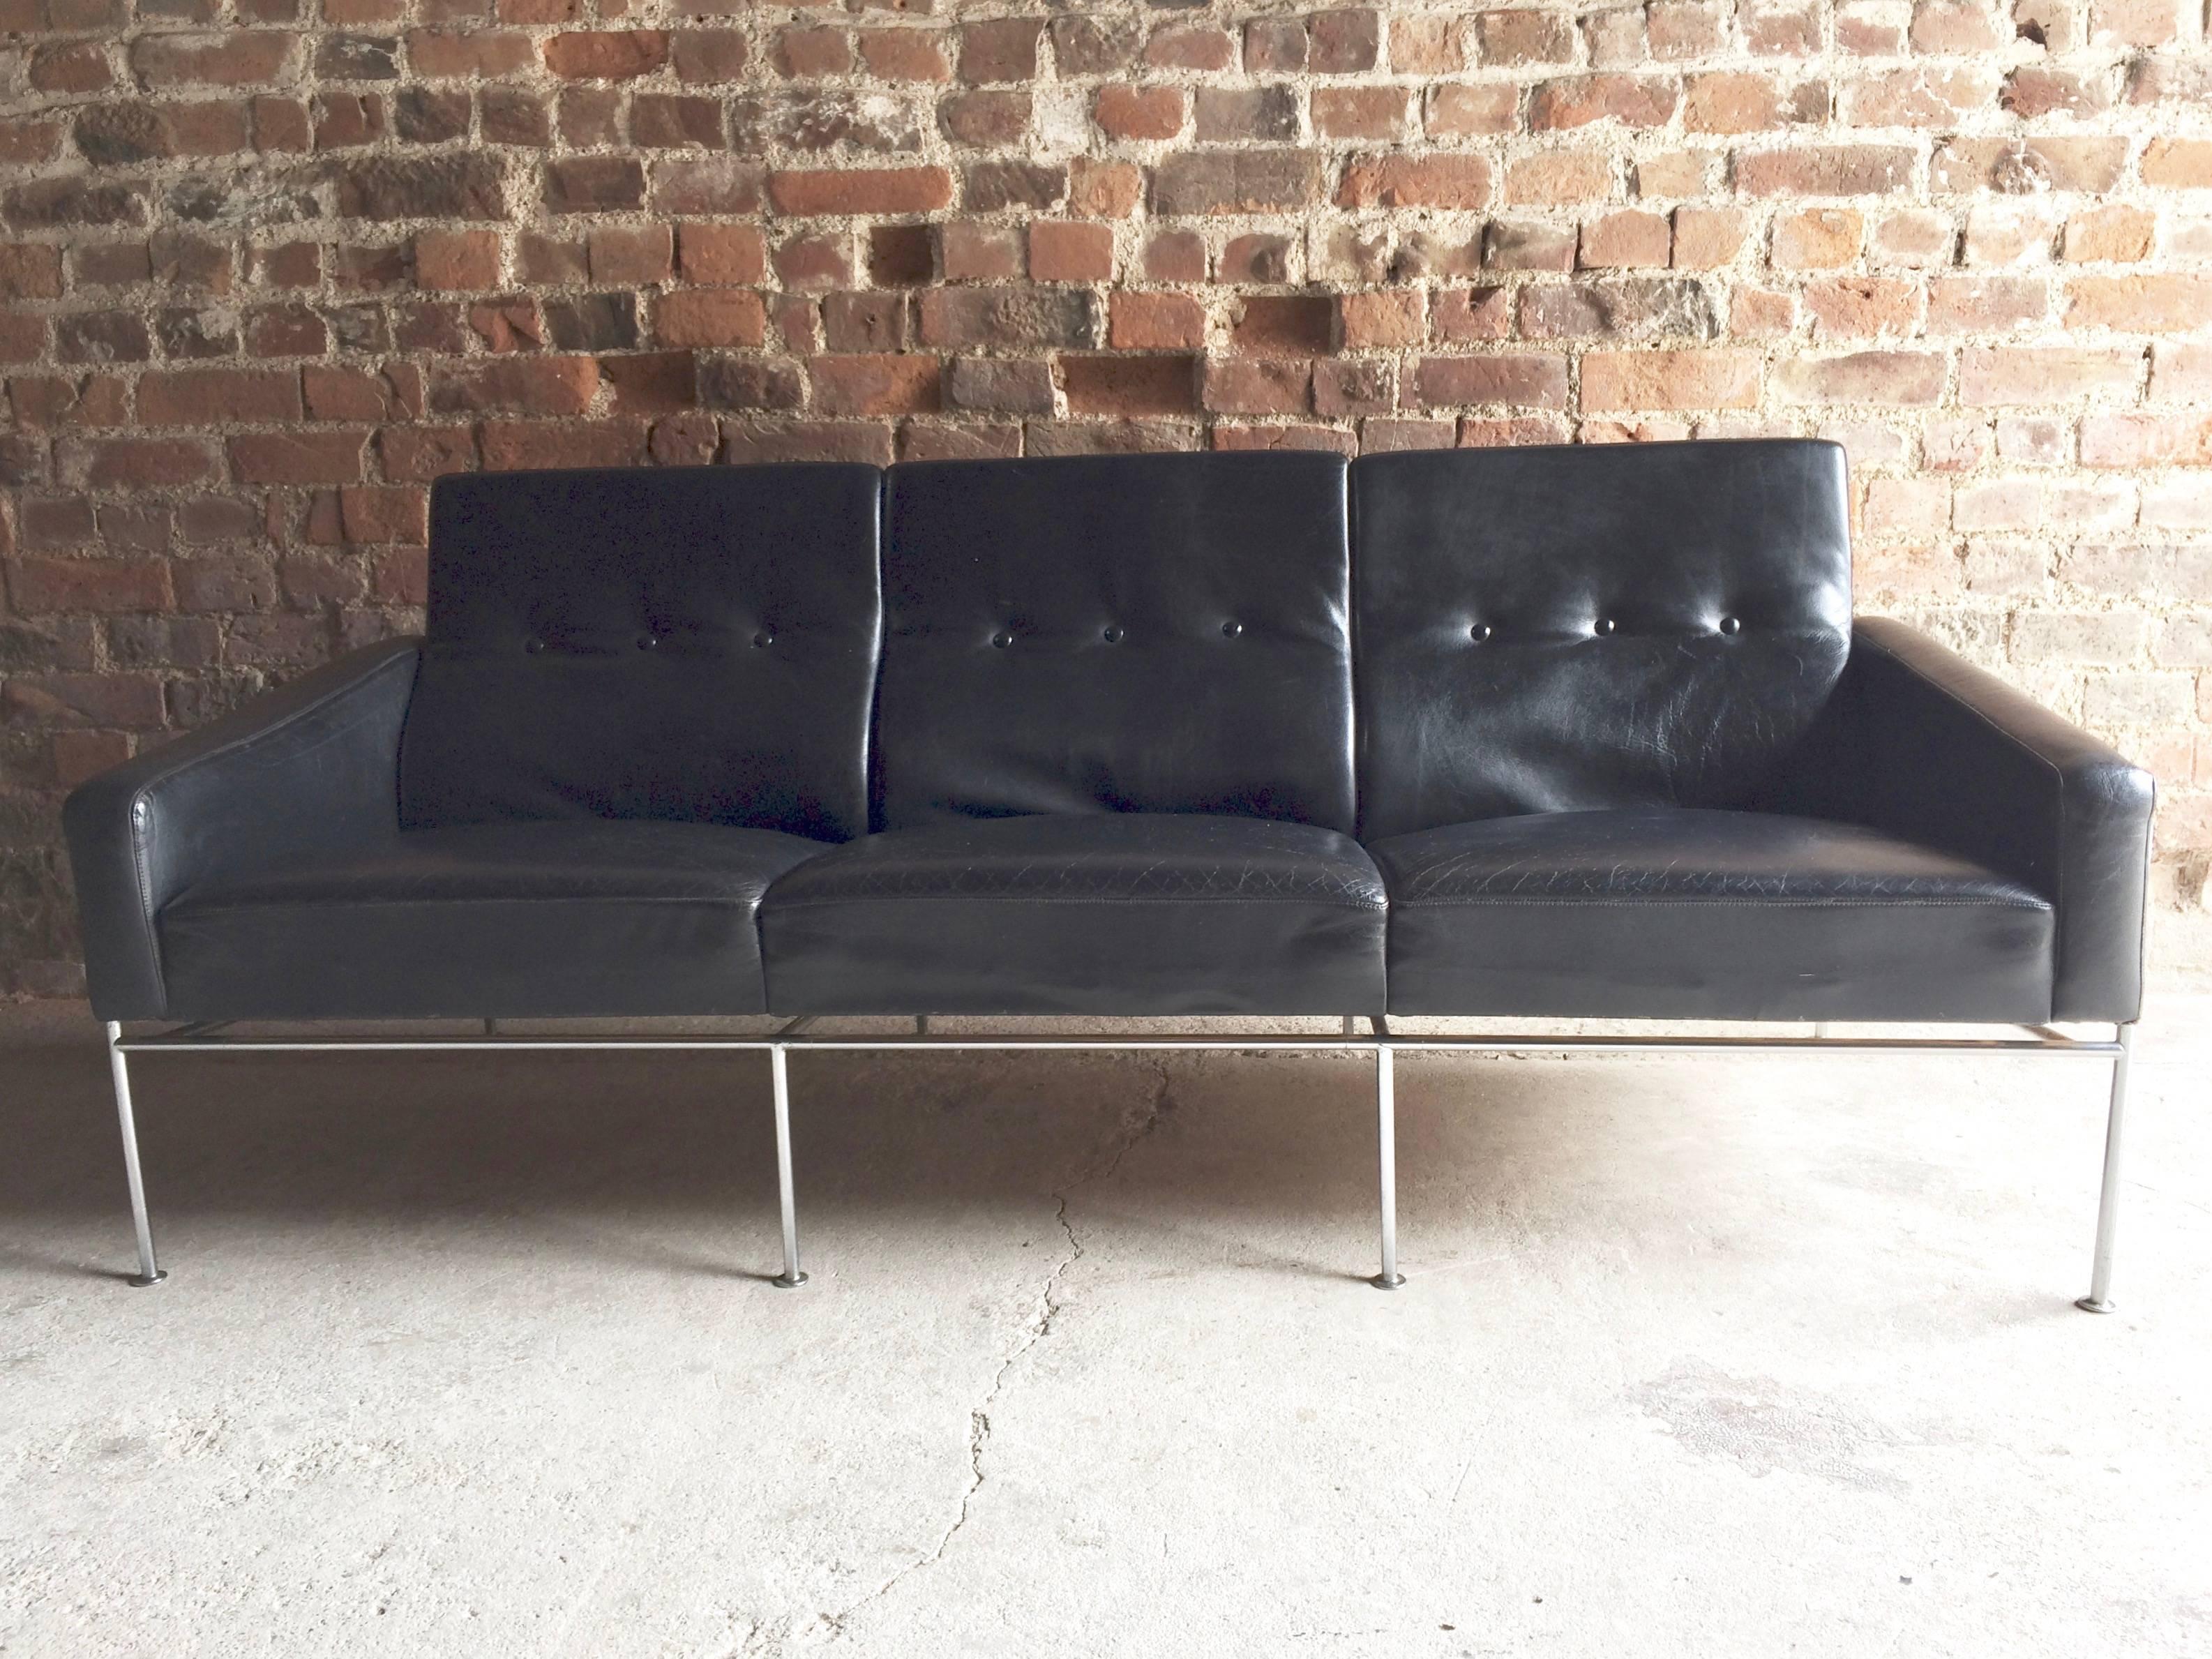 A stunning 1960s model 3300, three-seat black leather sofa, designed by Arne Jacobsen, manufactured by Fritz Hansen with chrome supports offered in superb original condition.

Arne Jacobsen got the inspiration for the series 3300 from a sofa he